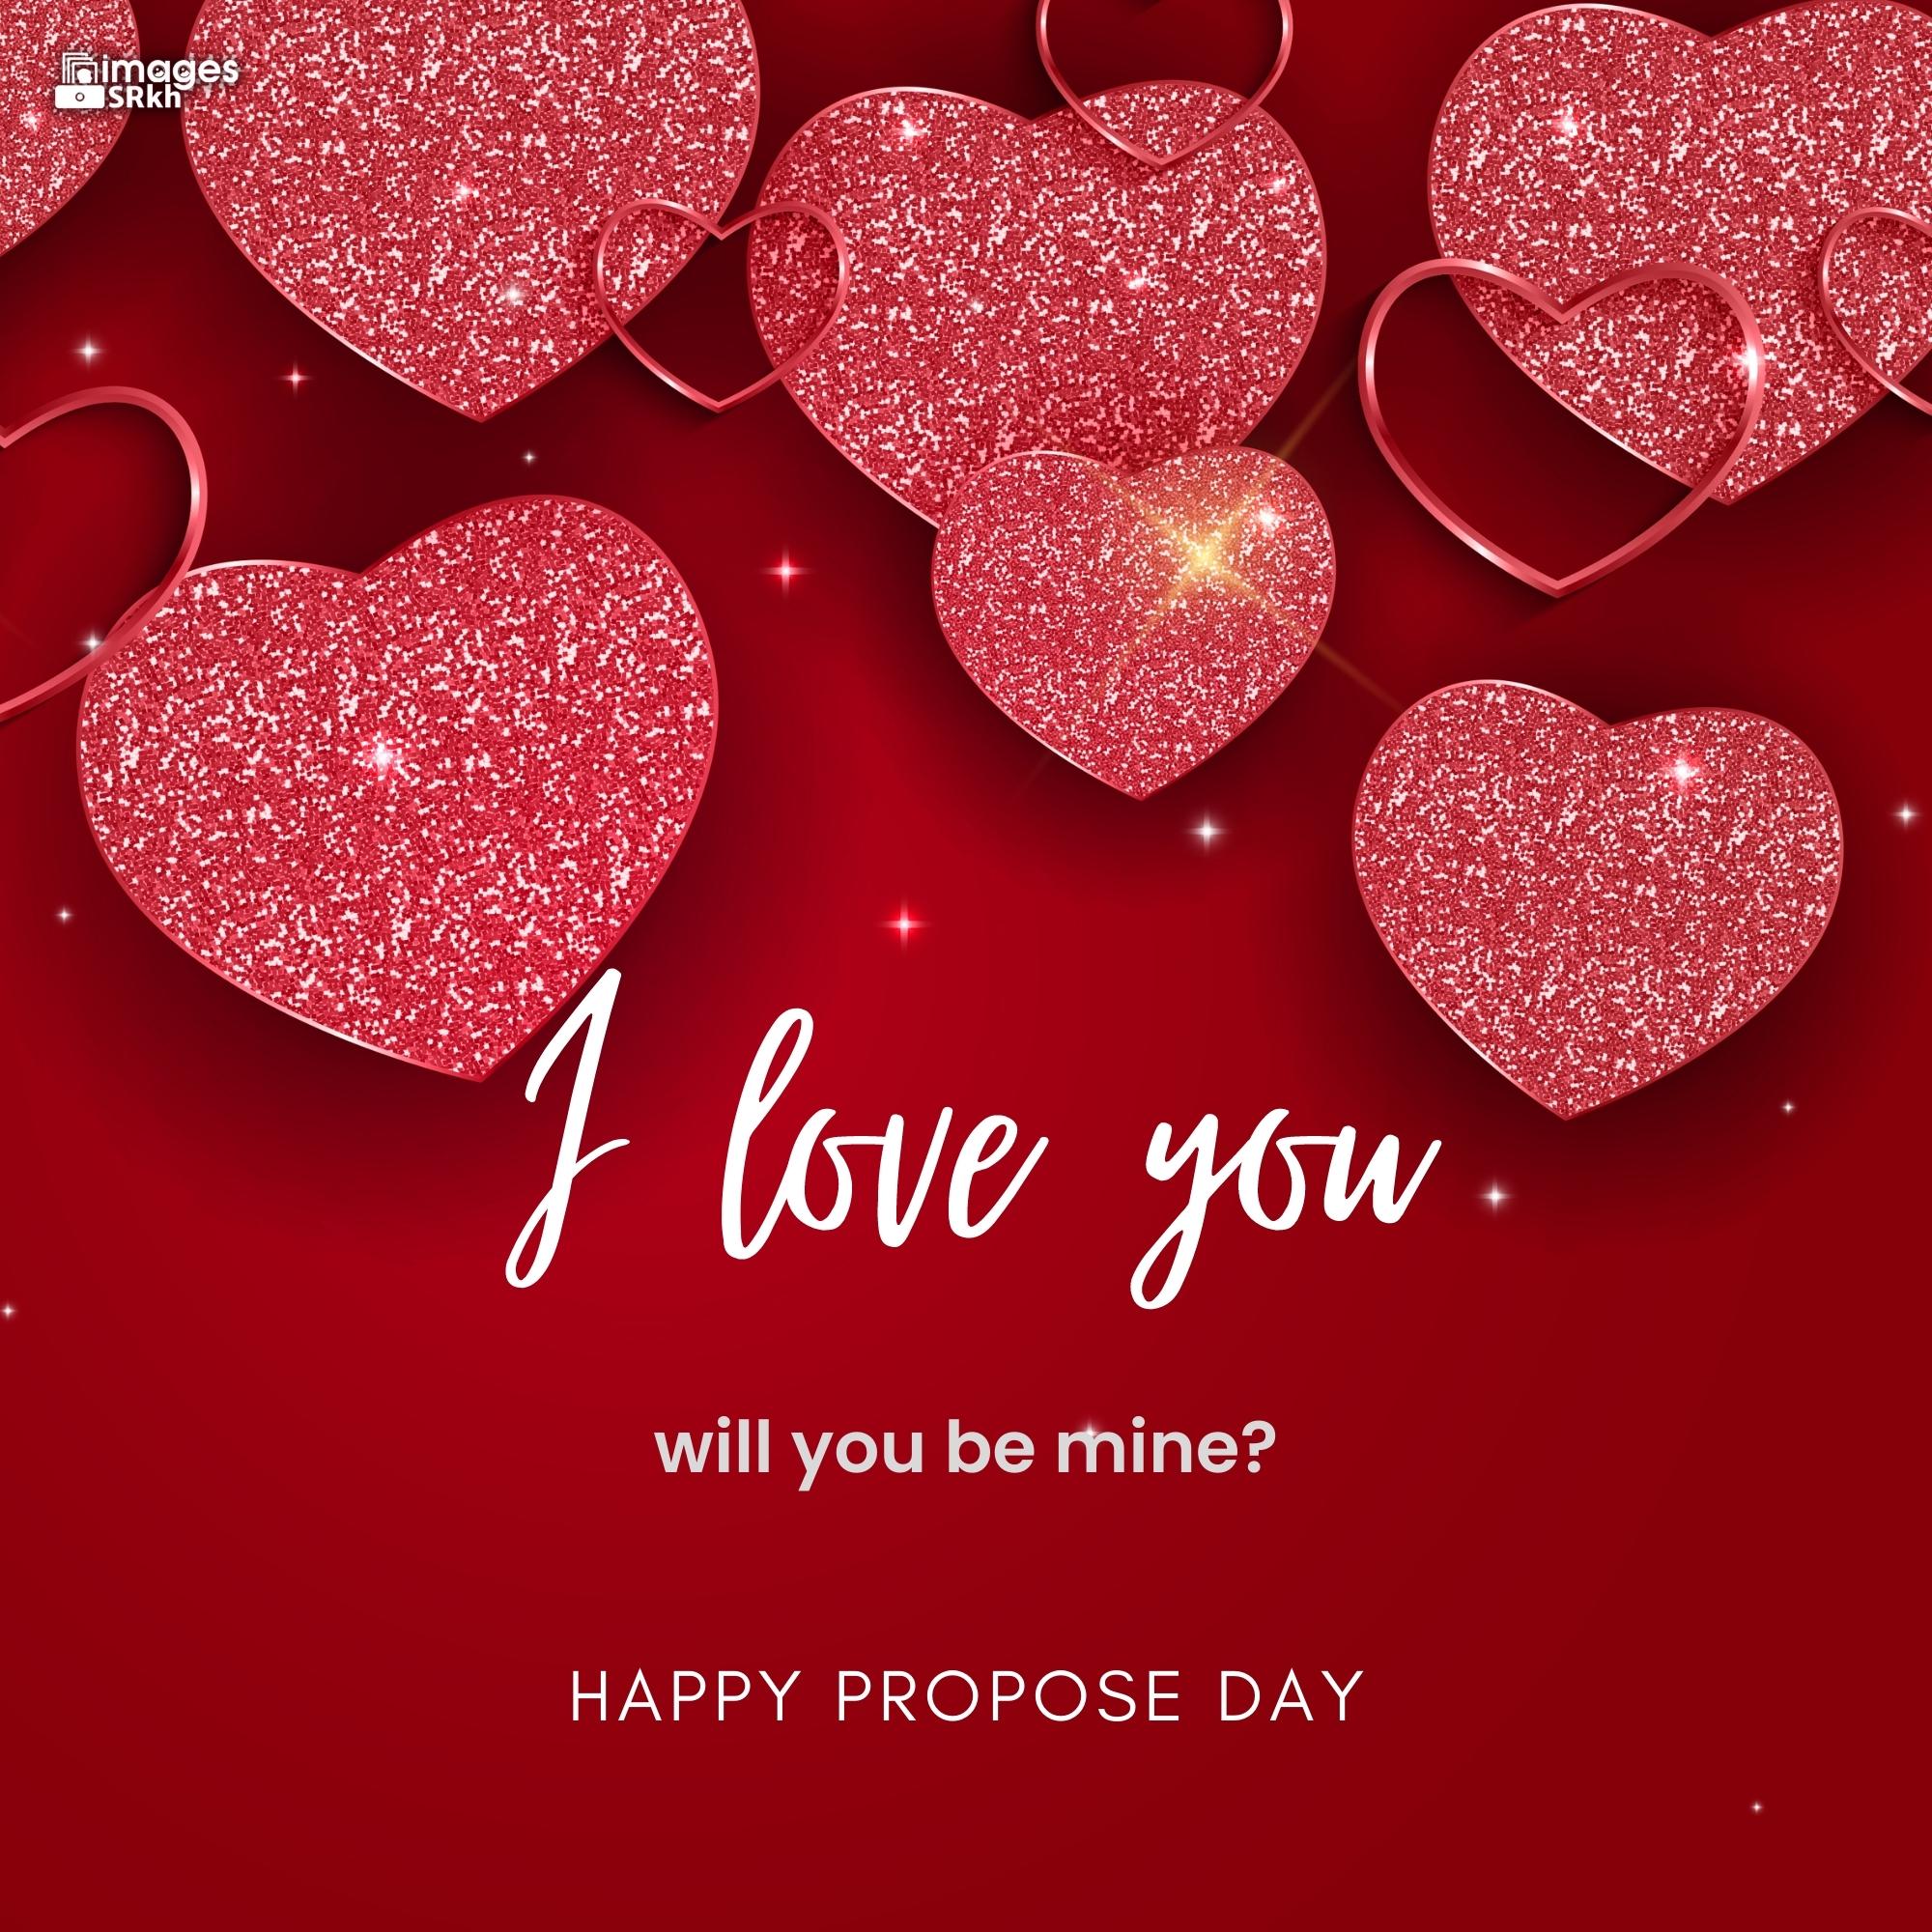 Happy Propose Day Images | 431 | I love you will you be mine